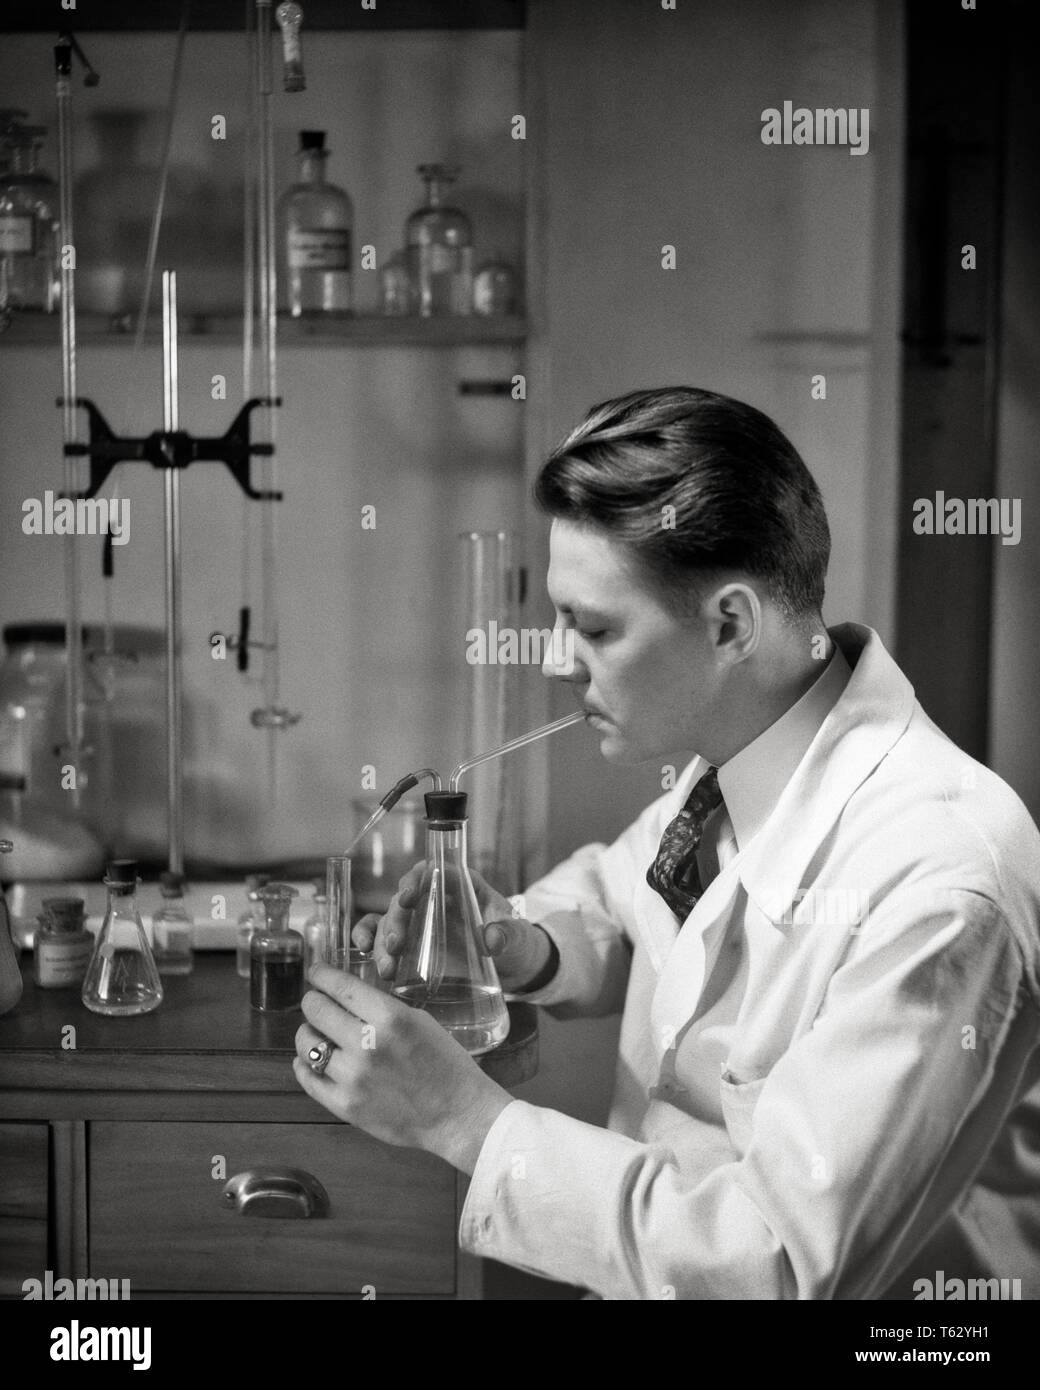 1930s MAN WORKING IN SCIENCE LABORATORY PIPETTING LIQUID FROM FLASK INTO A TEST TUBE - l1842 HAR001 HARS SKILL OCCUPATION SKILLS DISCOVERY CHEMIST SCIENTIFIC INNOVATION LABOR EMPLOYMENT OCCUPATIONS CONNECTION EMPLOYEE FLASK SOLUTIONS YOUNG ADULT MAN BLACK AND WHITE CAUCASIAN ETHNICITY CHEMICALS HAR001 LABORATORIES LABORING LABS OLD FASHIONED Stock Photo